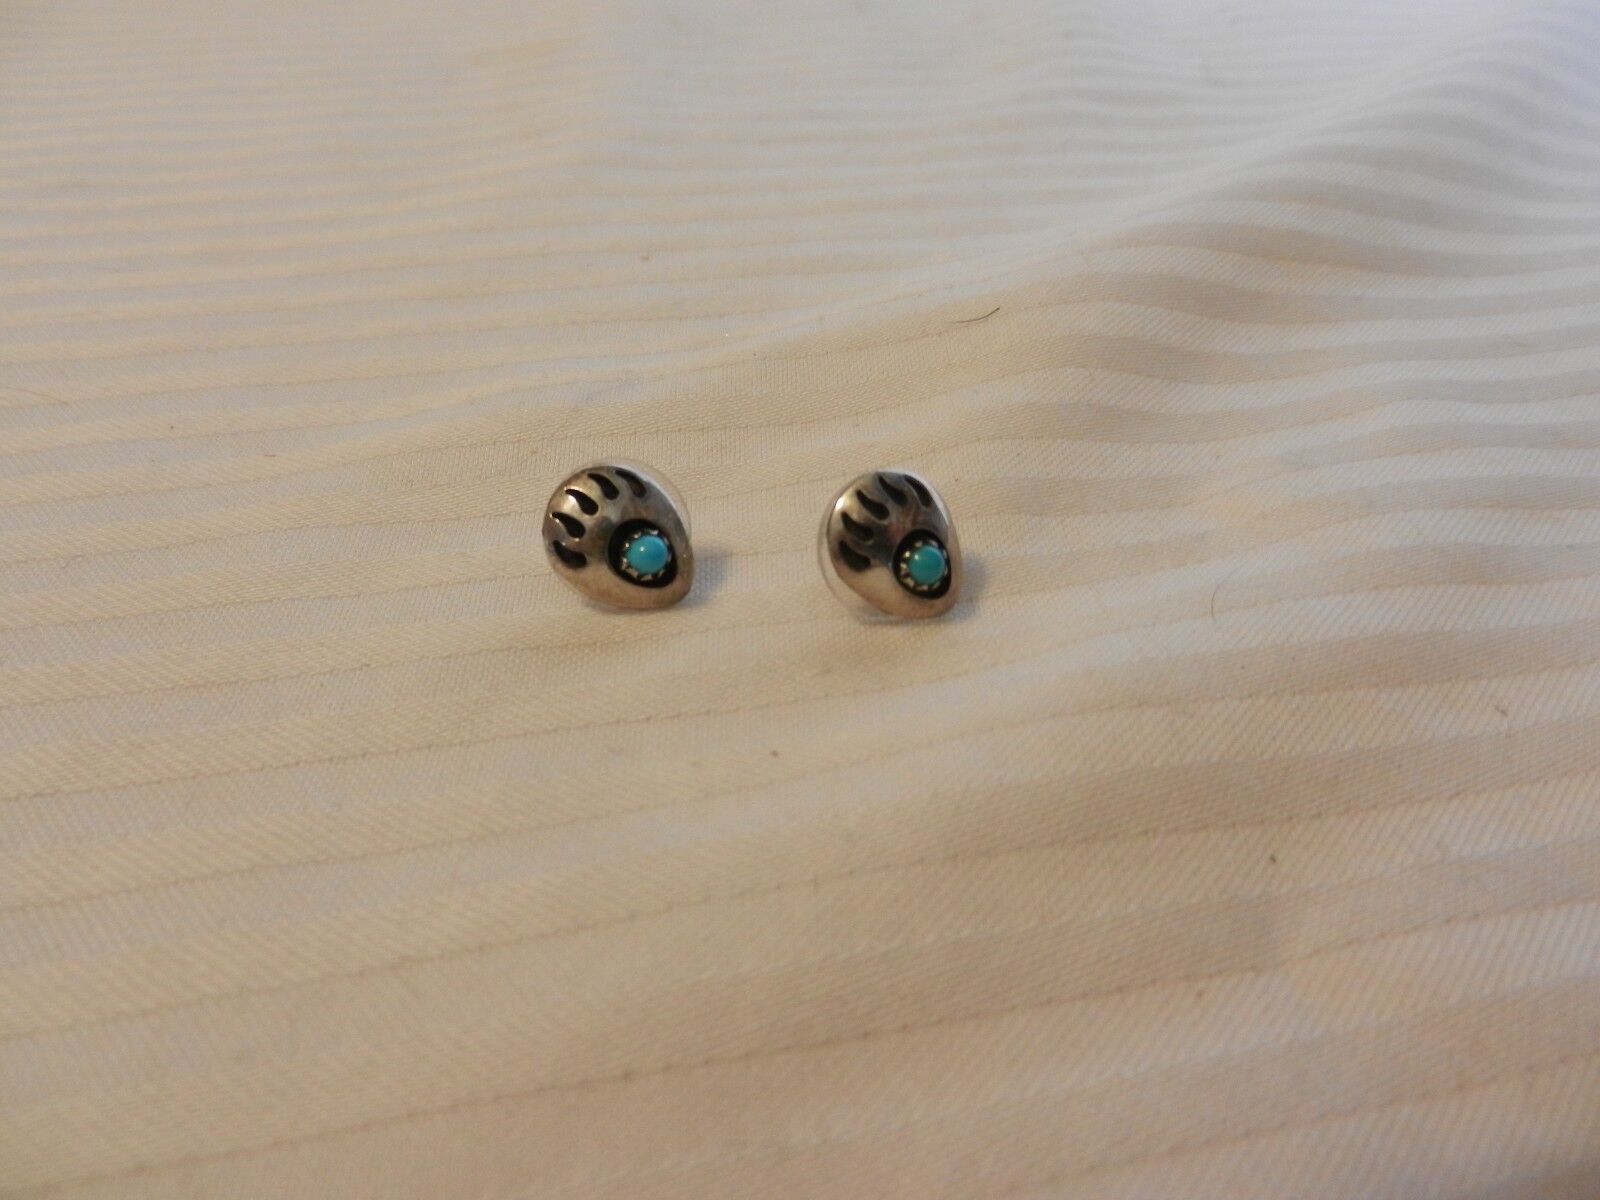 Primary image for Women's Vintage Southwestern Style Silver Tone Metal Pierced Earrings Turquoise